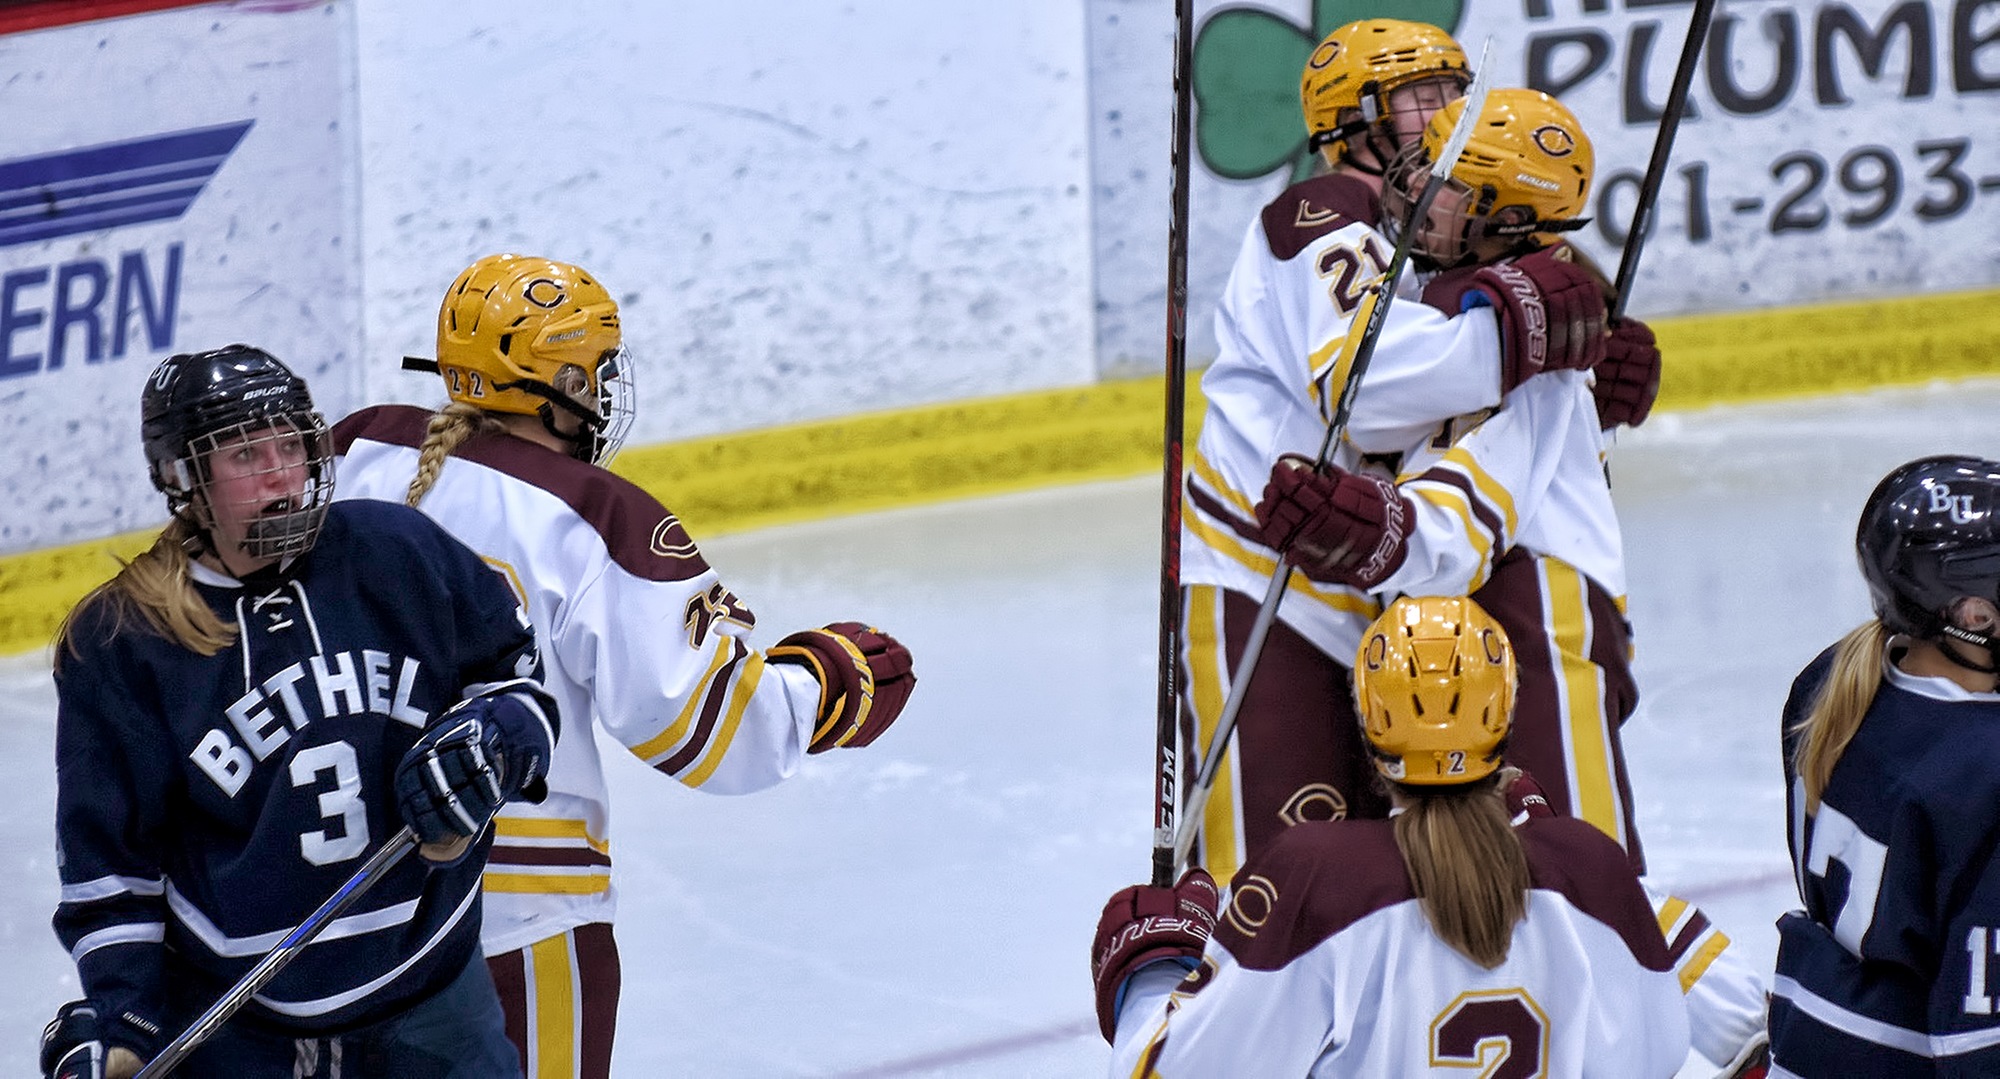 Concordia had seven different players score goals and exploded for a 7-1 win over Bethel in the series opener.